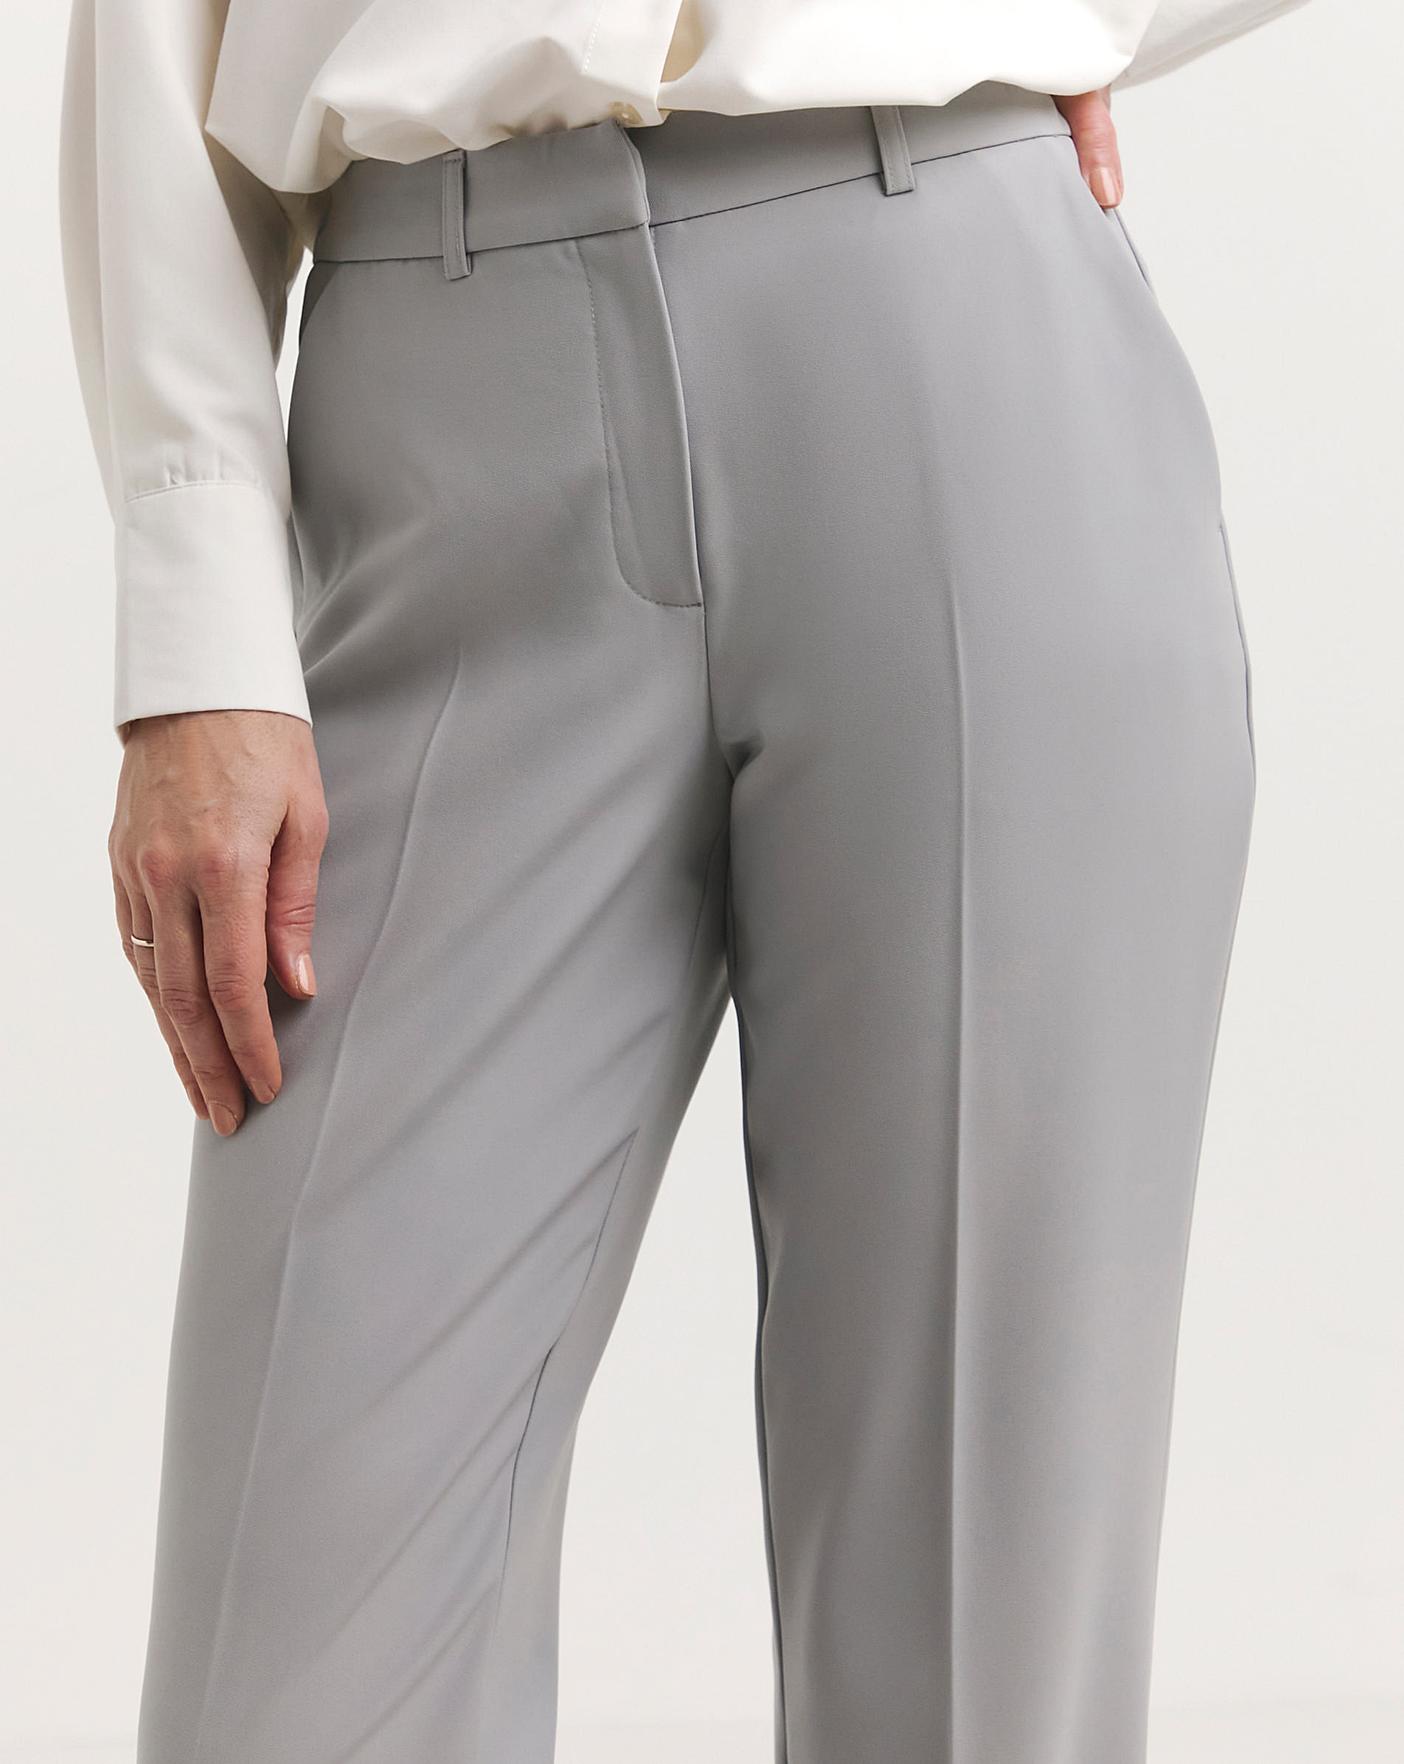 Buy Grey Trousers & Pants for Women by SELVIA Online | Ajio.com